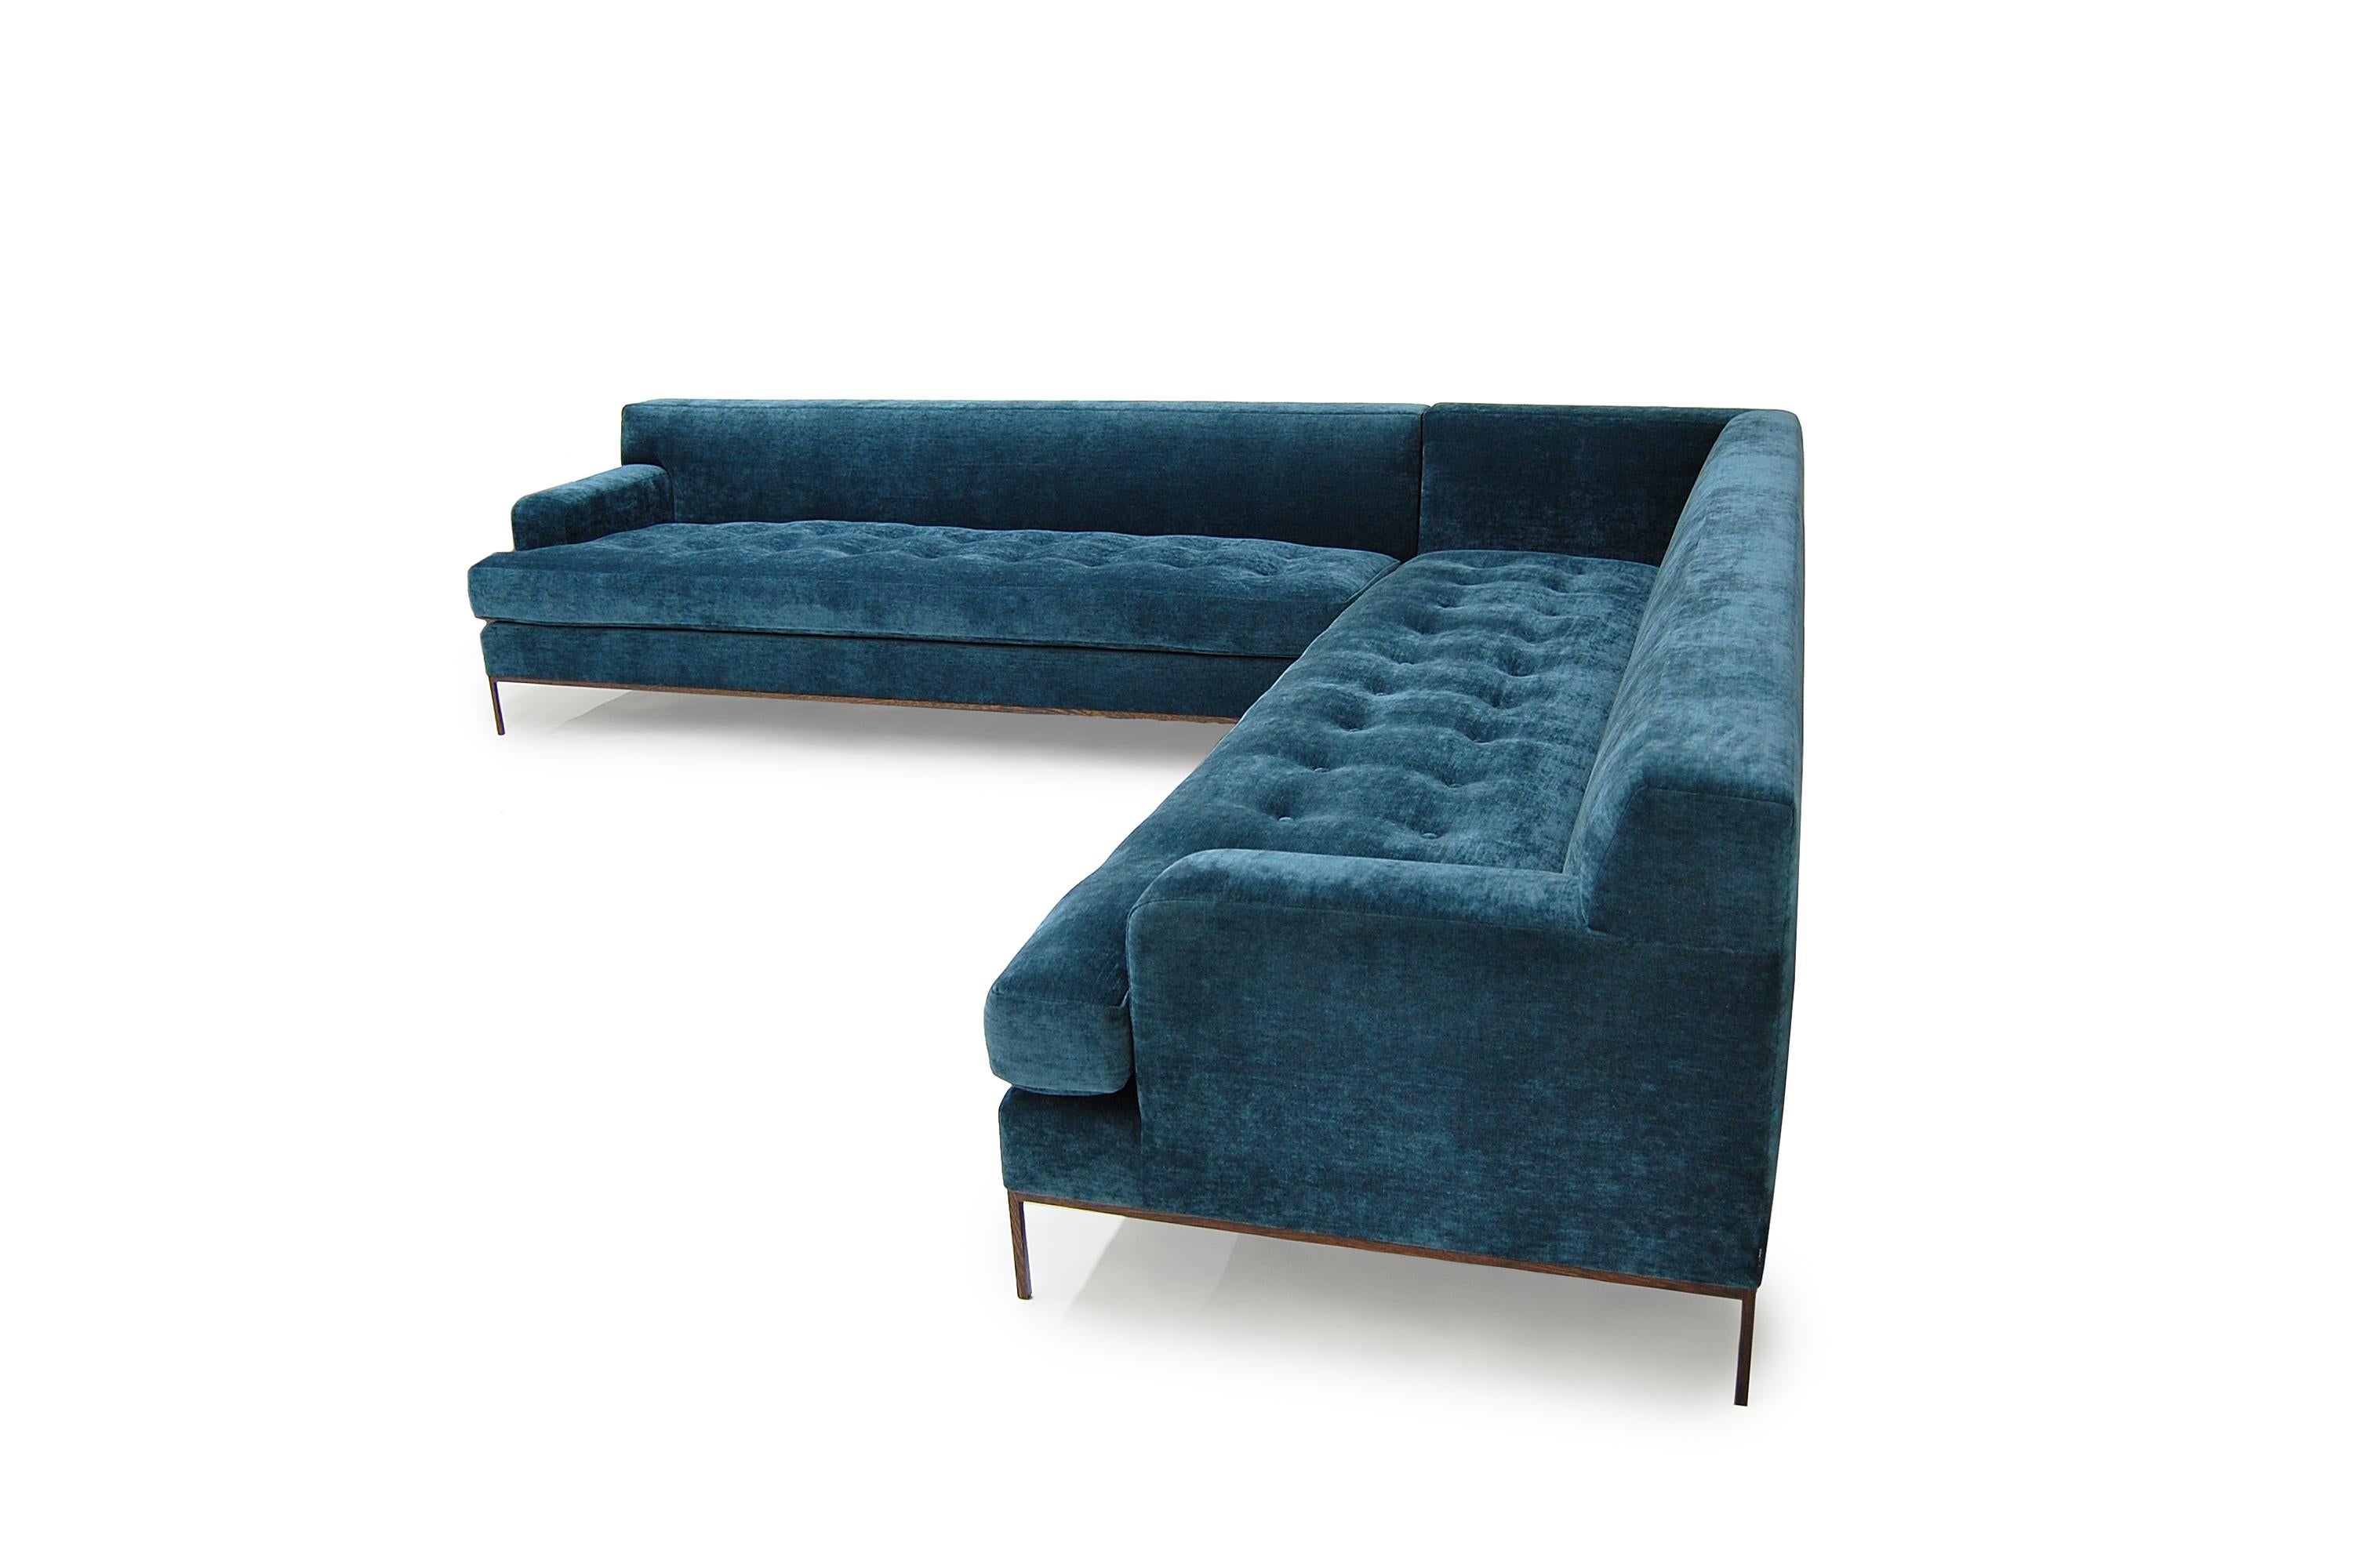 Other Stiletto Sectional ‘Loose Cushions’-Tufted, Metal Base, Wenge Veneer, Round Arms For Sale